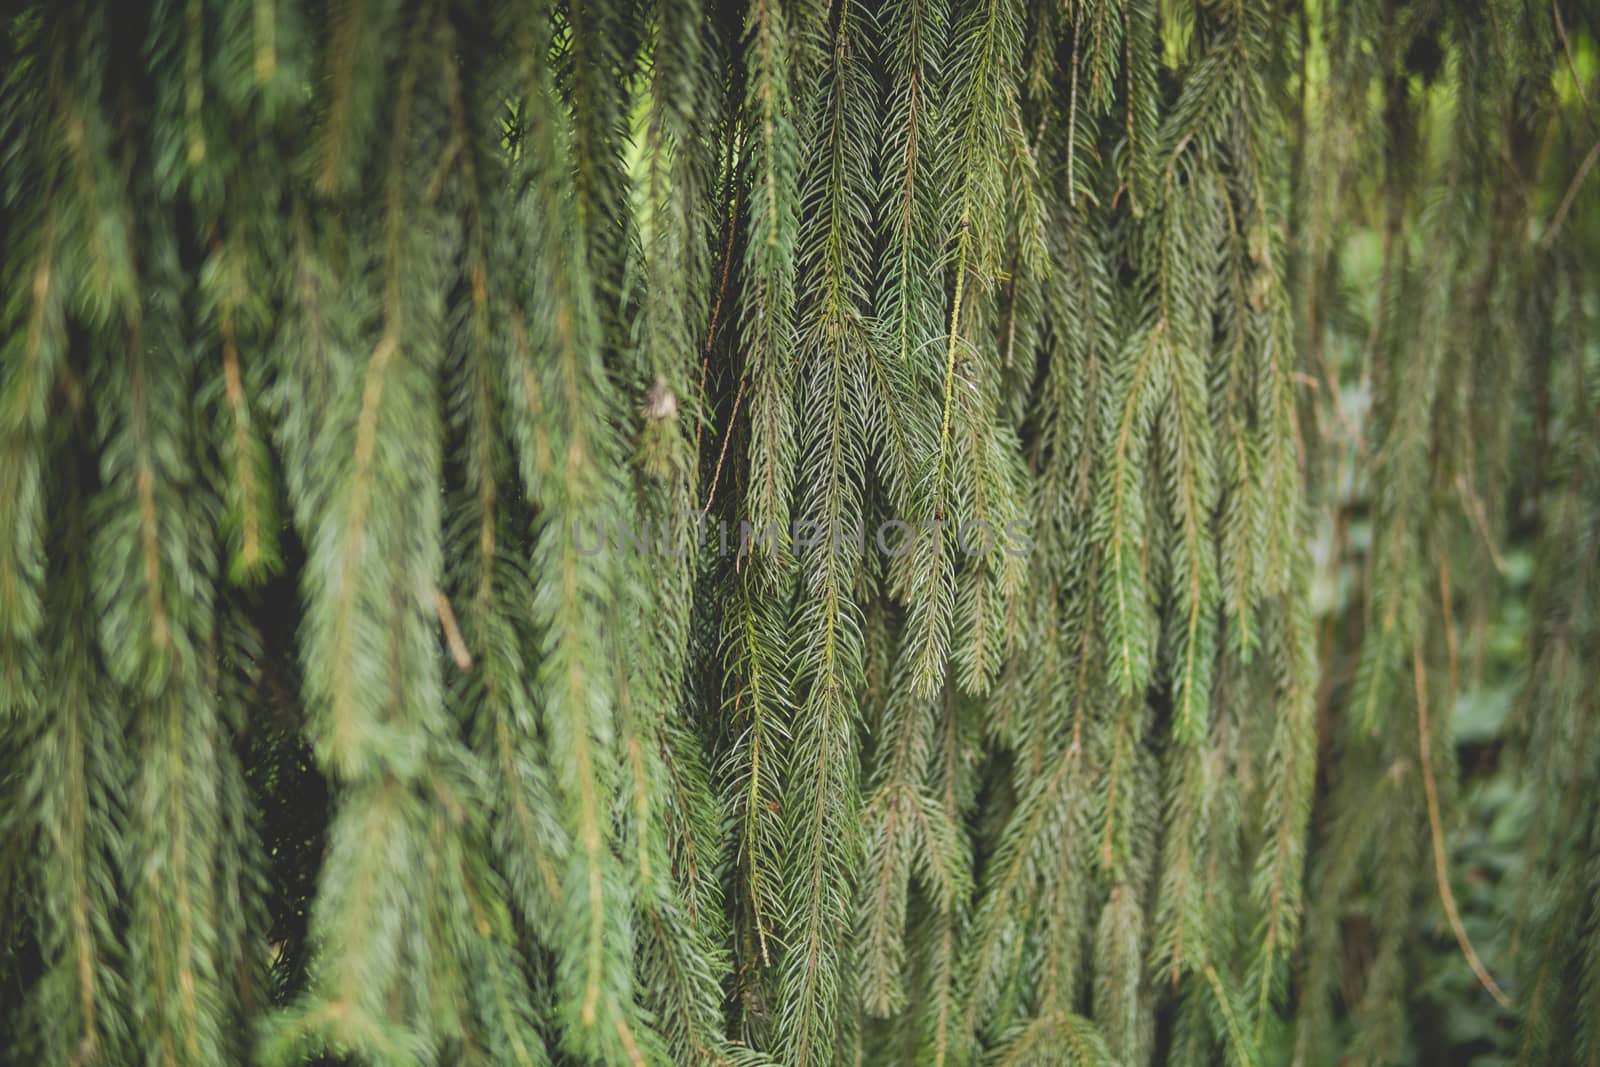 detail of needles of spruce growing in a garden during summer season